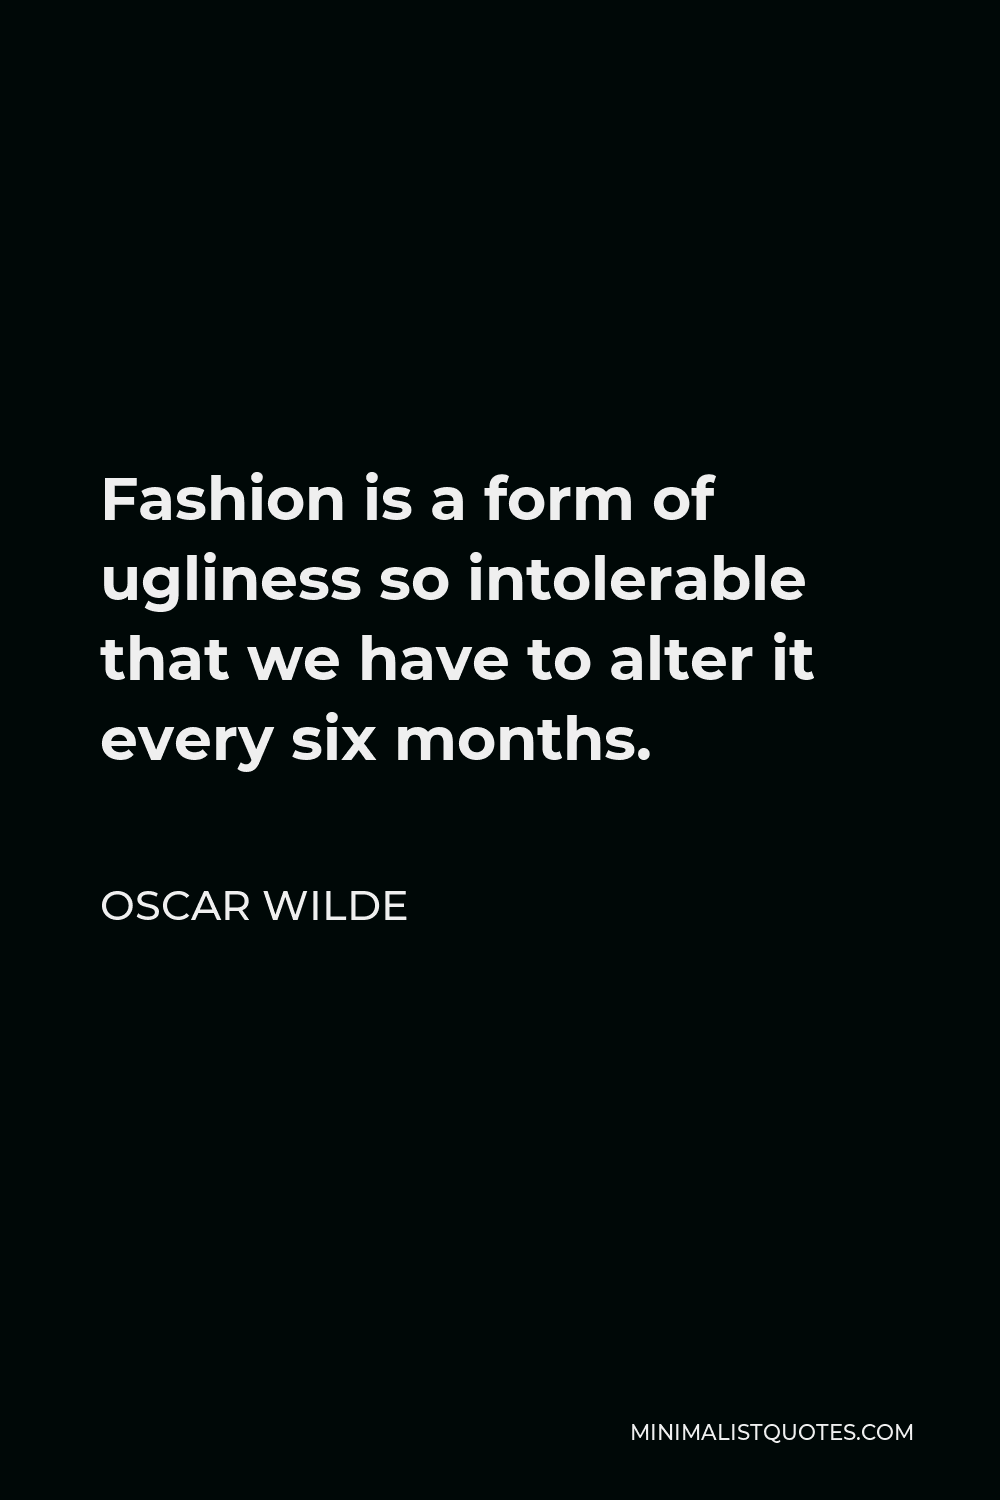 Oscar Wilde Quote - Fashion is a form of ugliness so intolerable that we have to alter it every six months.